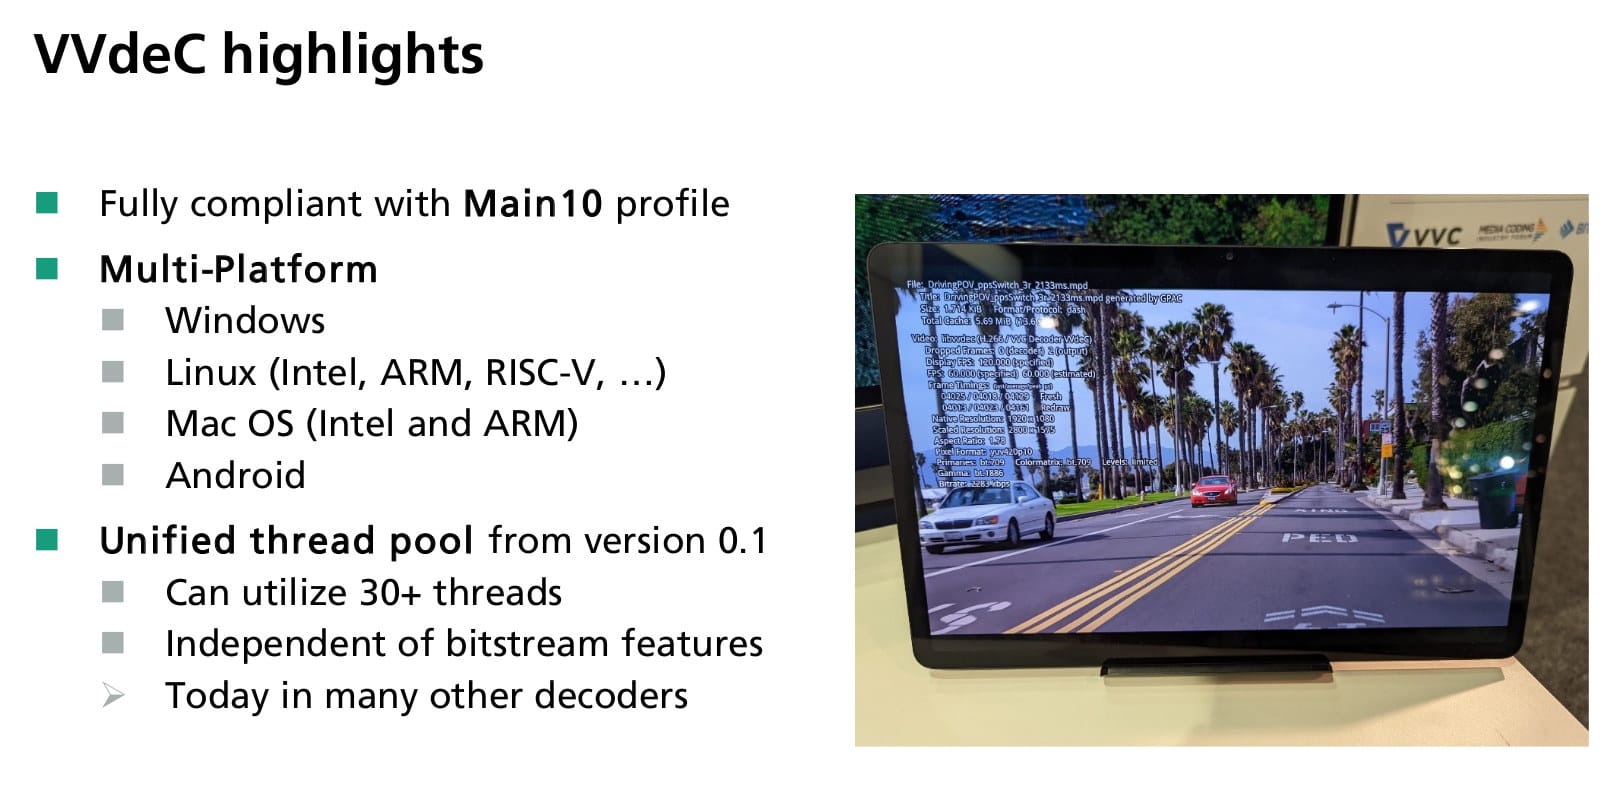 VVenC and VVdeC H.266 open source video encoder and decoder work on x86 and Arm